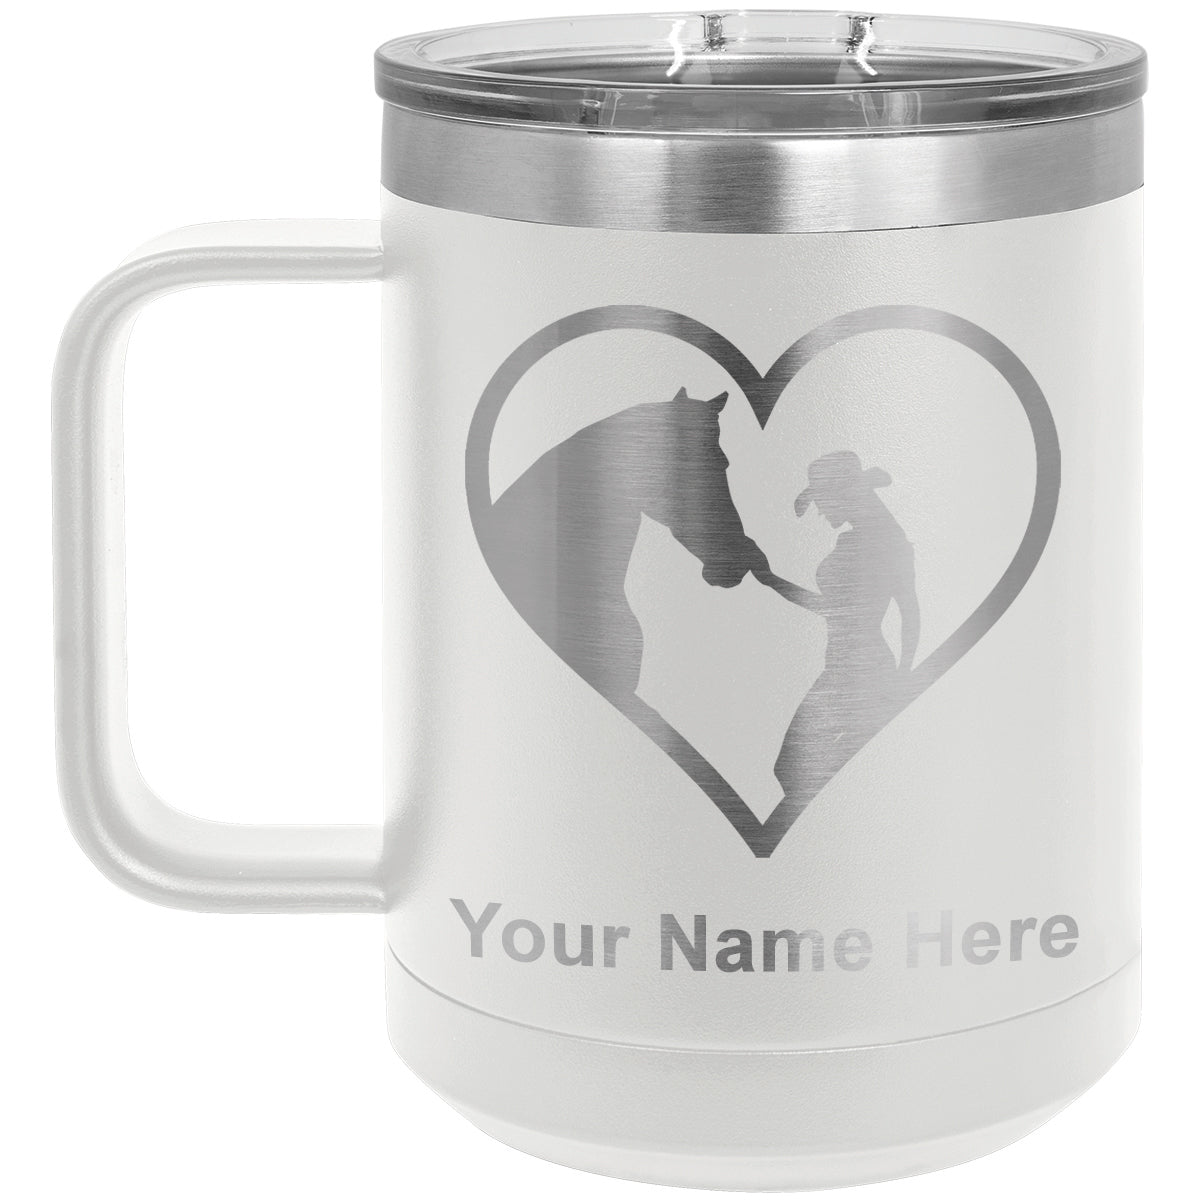 15oz Vacuum Insulated Coffee Mug, Horse Cowgirl Heart, Personalized Engraving Included